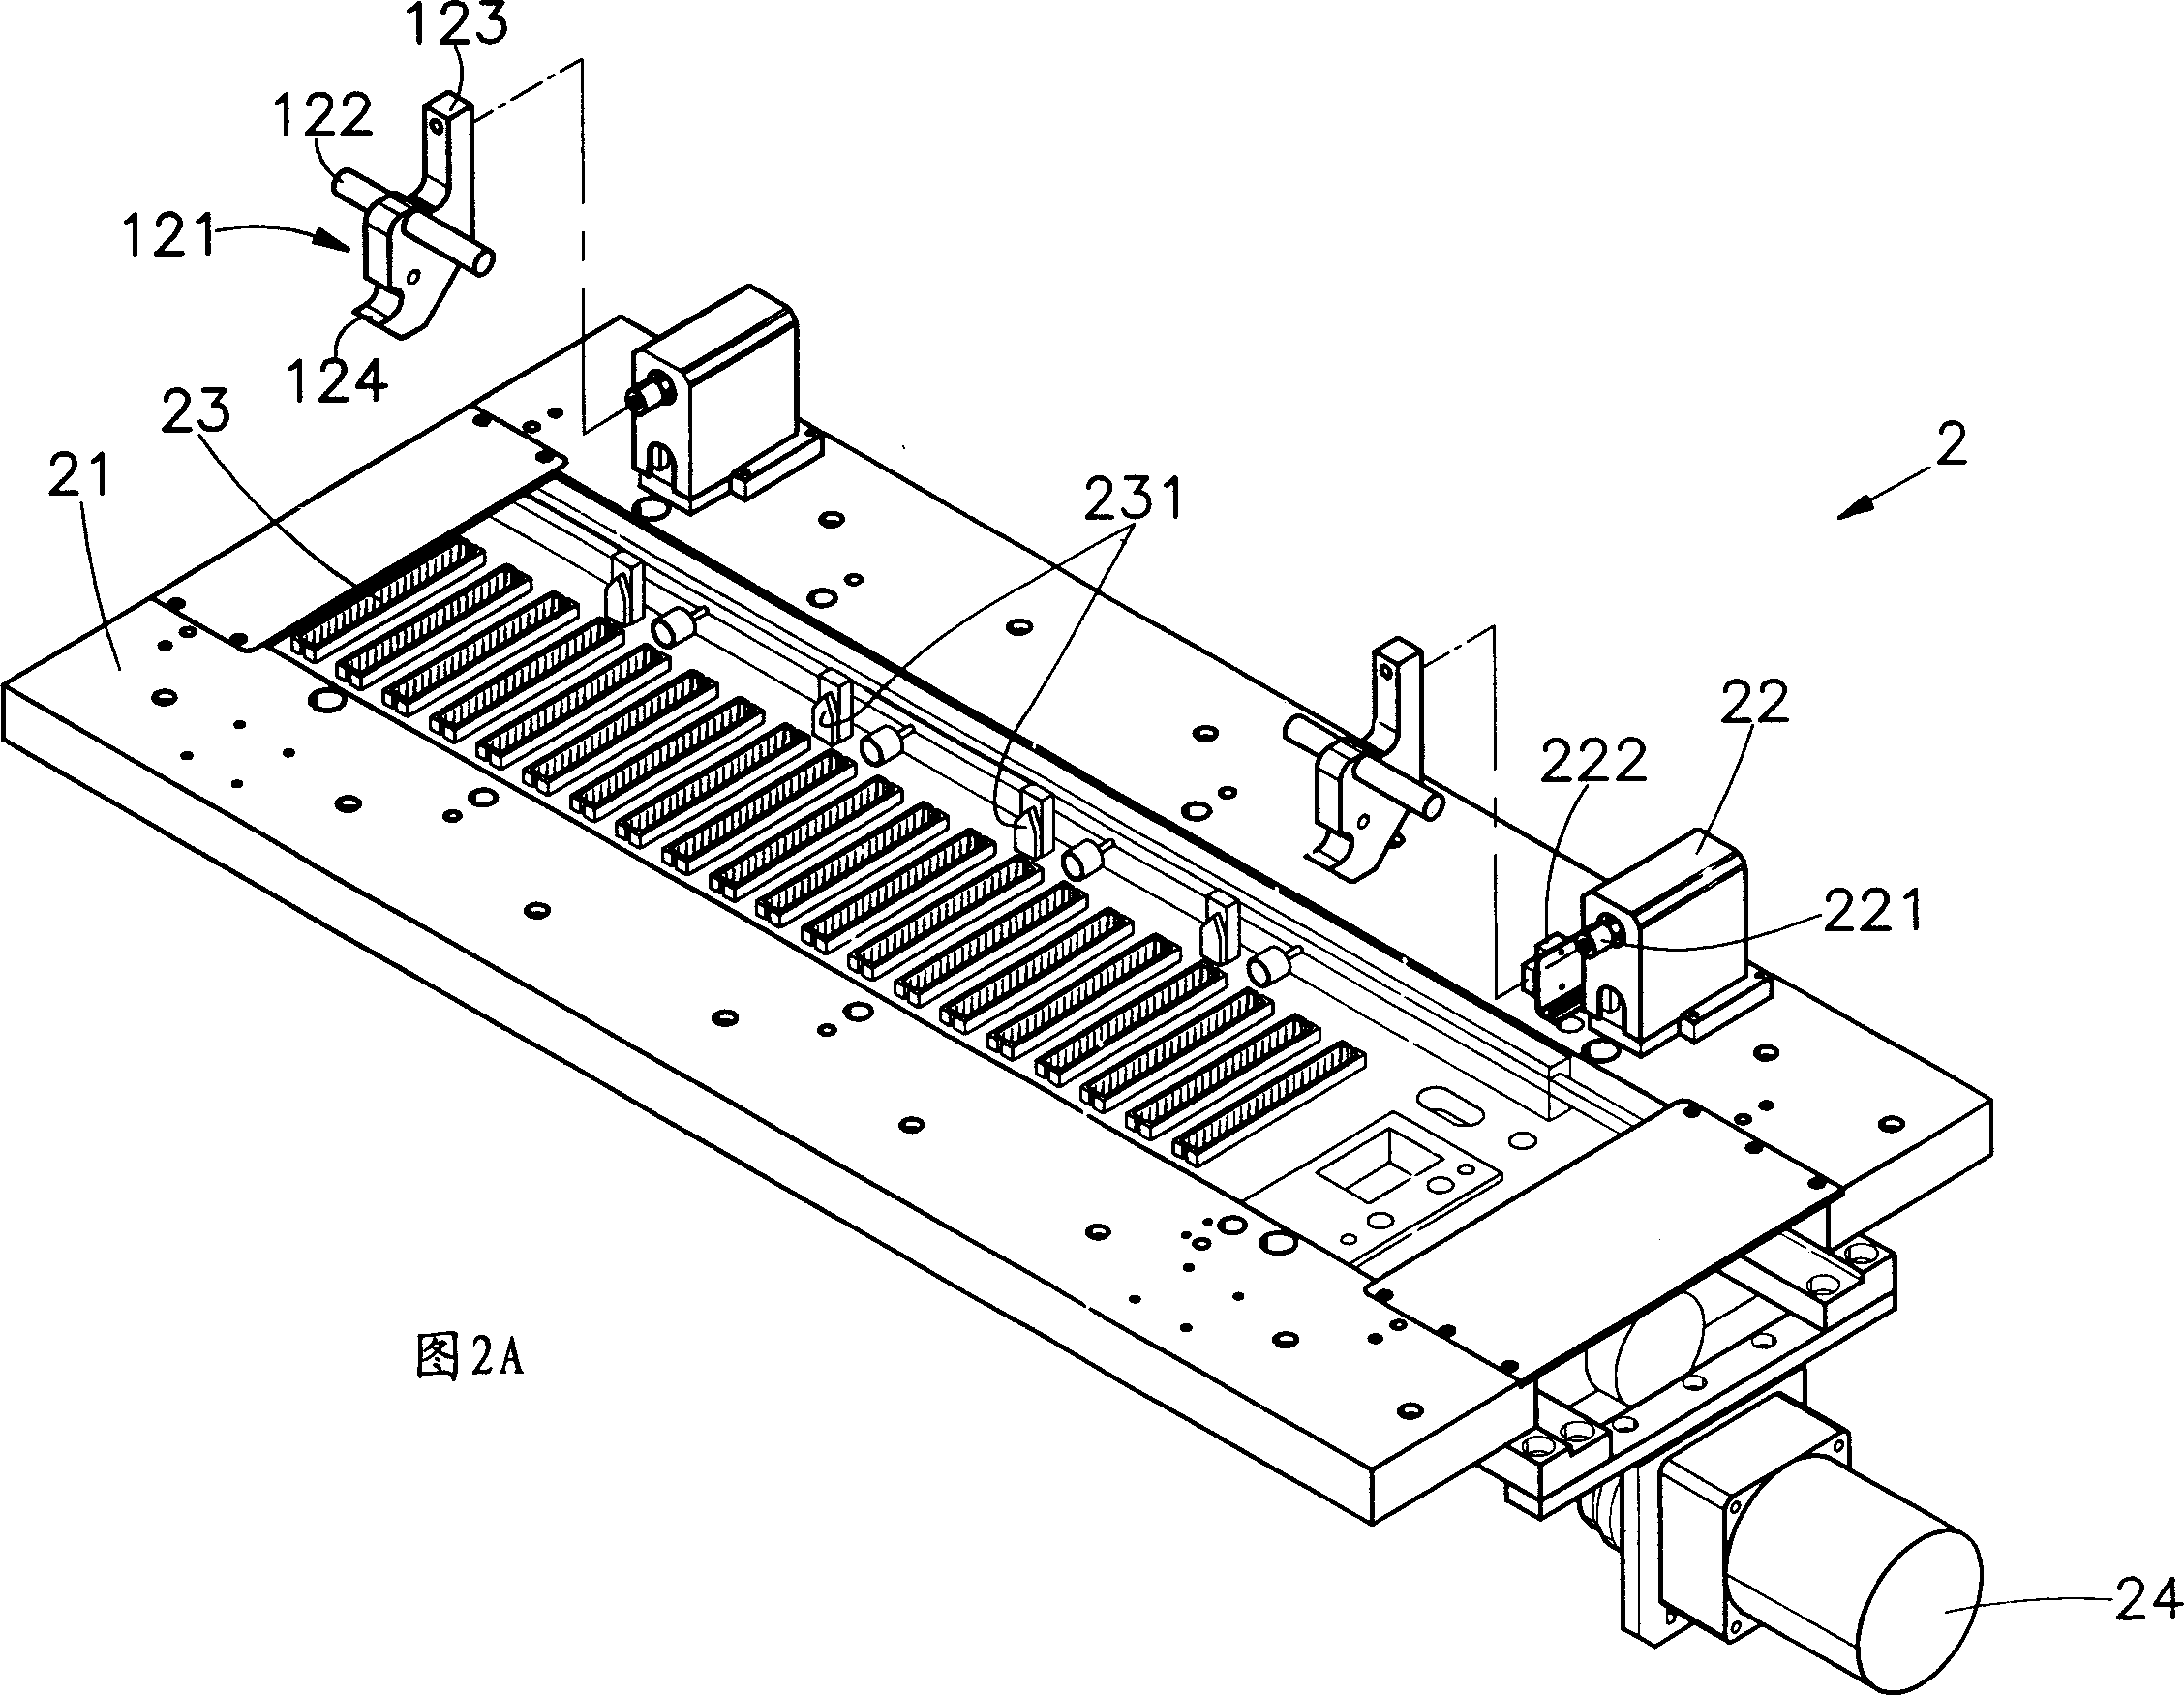 Testing fixture and machine station combination device